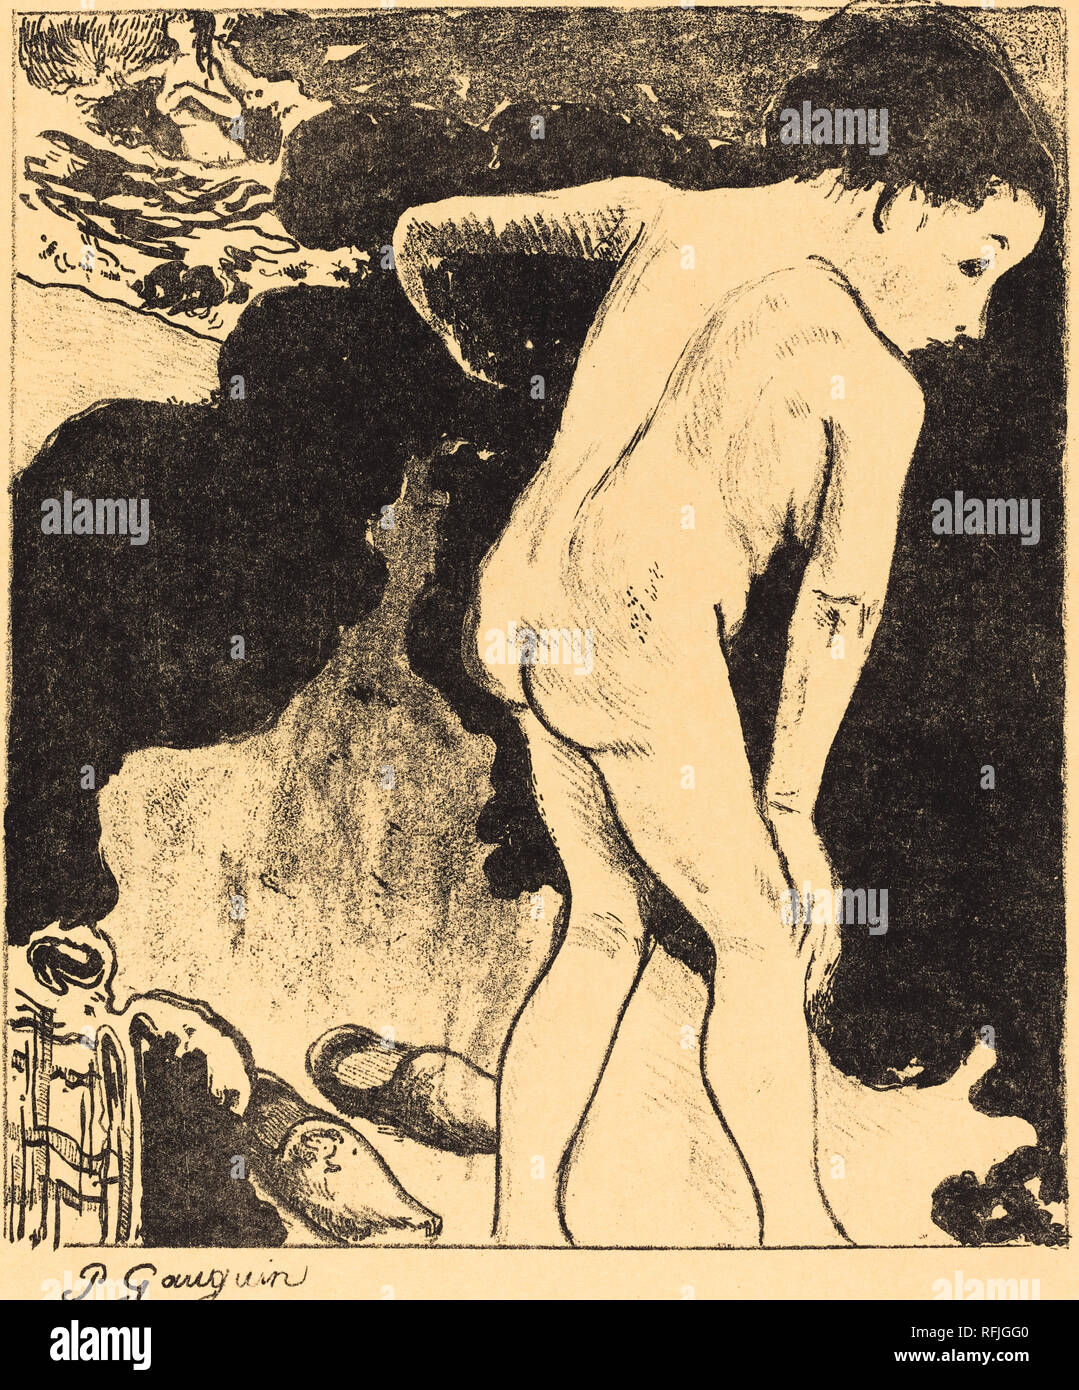 Bathers in Brittany (Baigneuses Bretonnes). Dated: 1889. Medium: lithograph (zinc) in black on imitation japan paper. Museum: National Gallery of Art, Washington DC. Author: PAUL GAUGUIN. Stock Photo